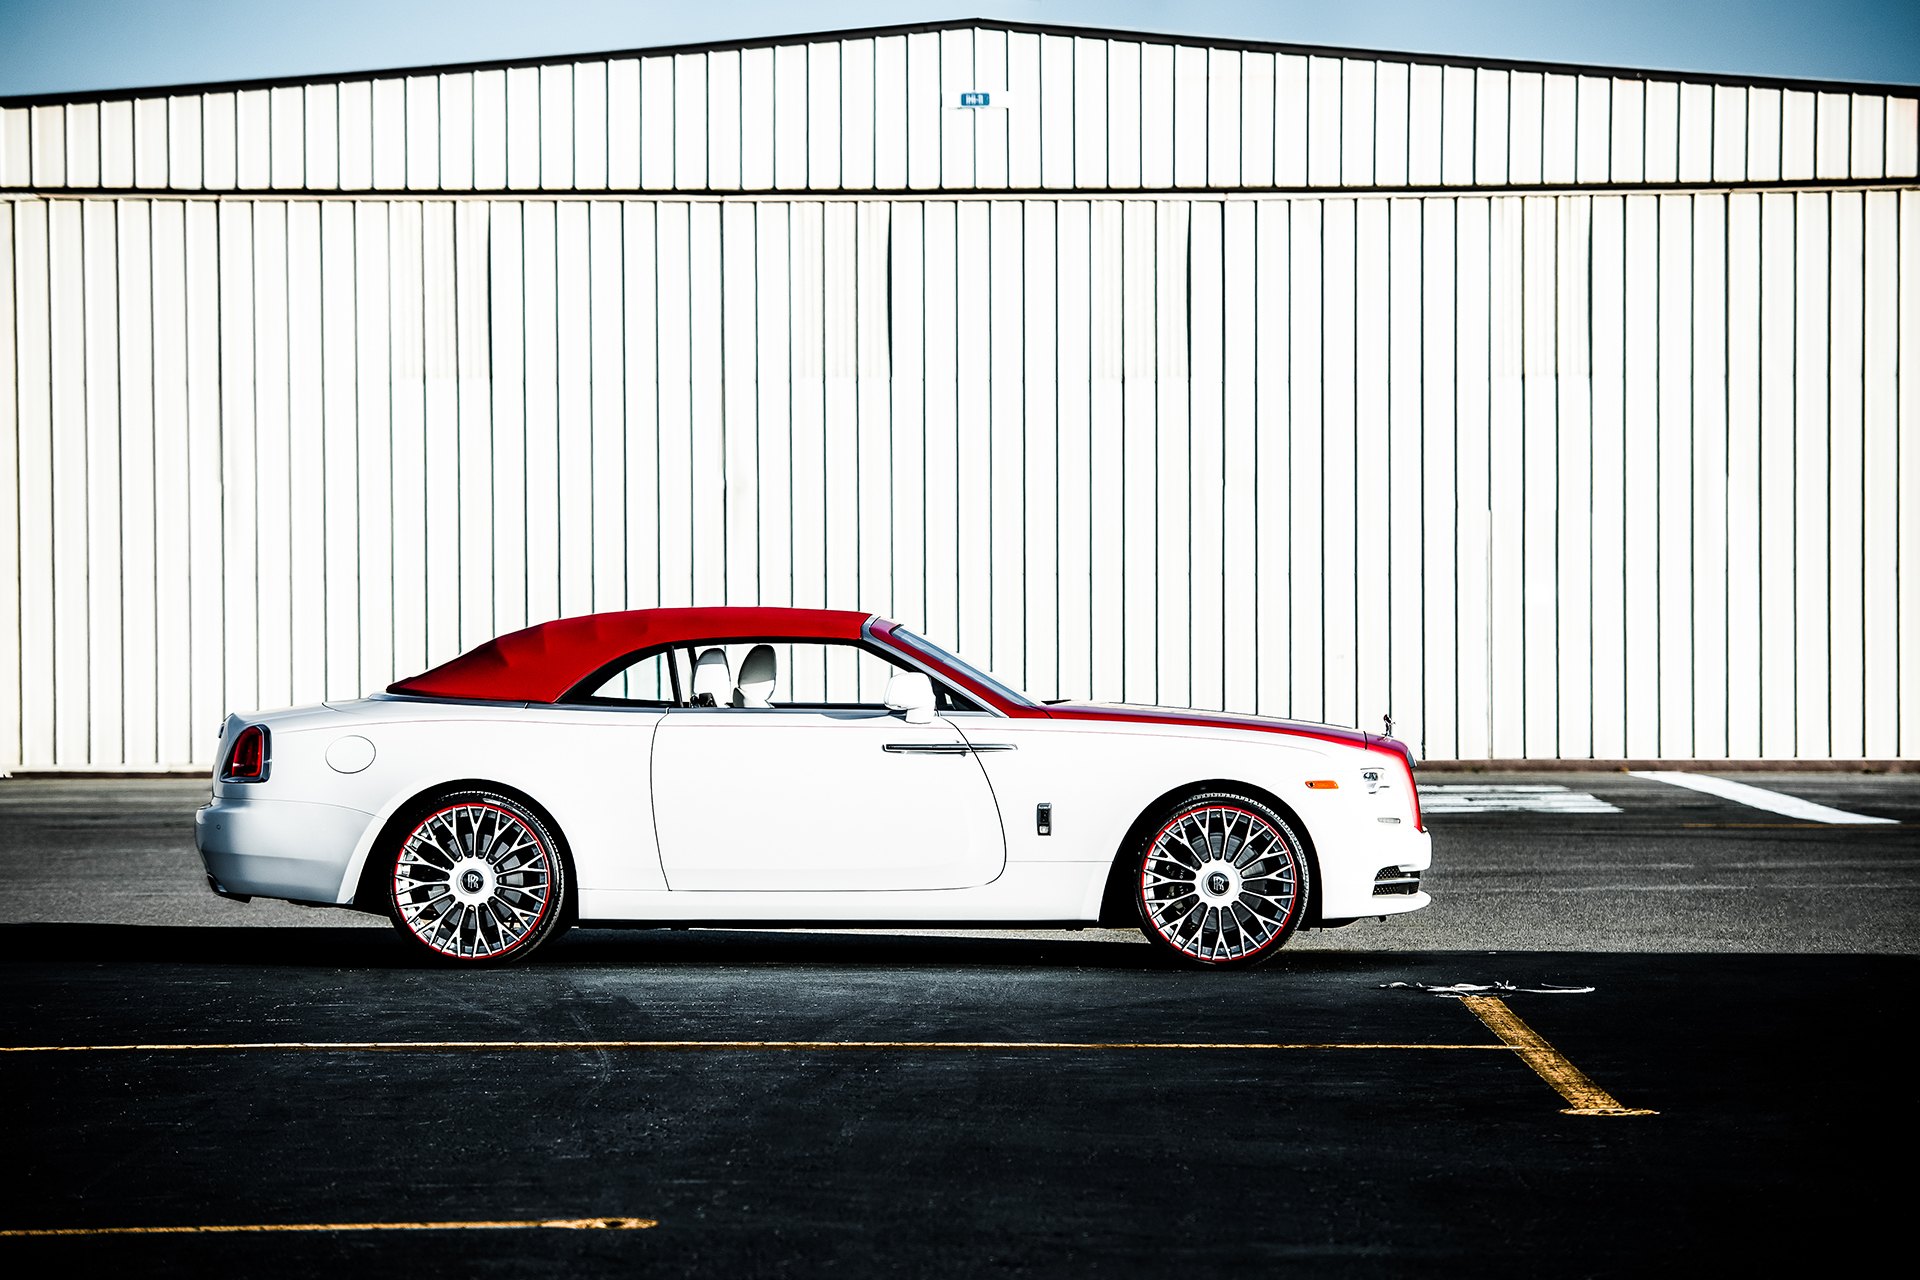 Aftermarket Side Skirts on White Rolls Royce Dawn - Photo by Forgiato